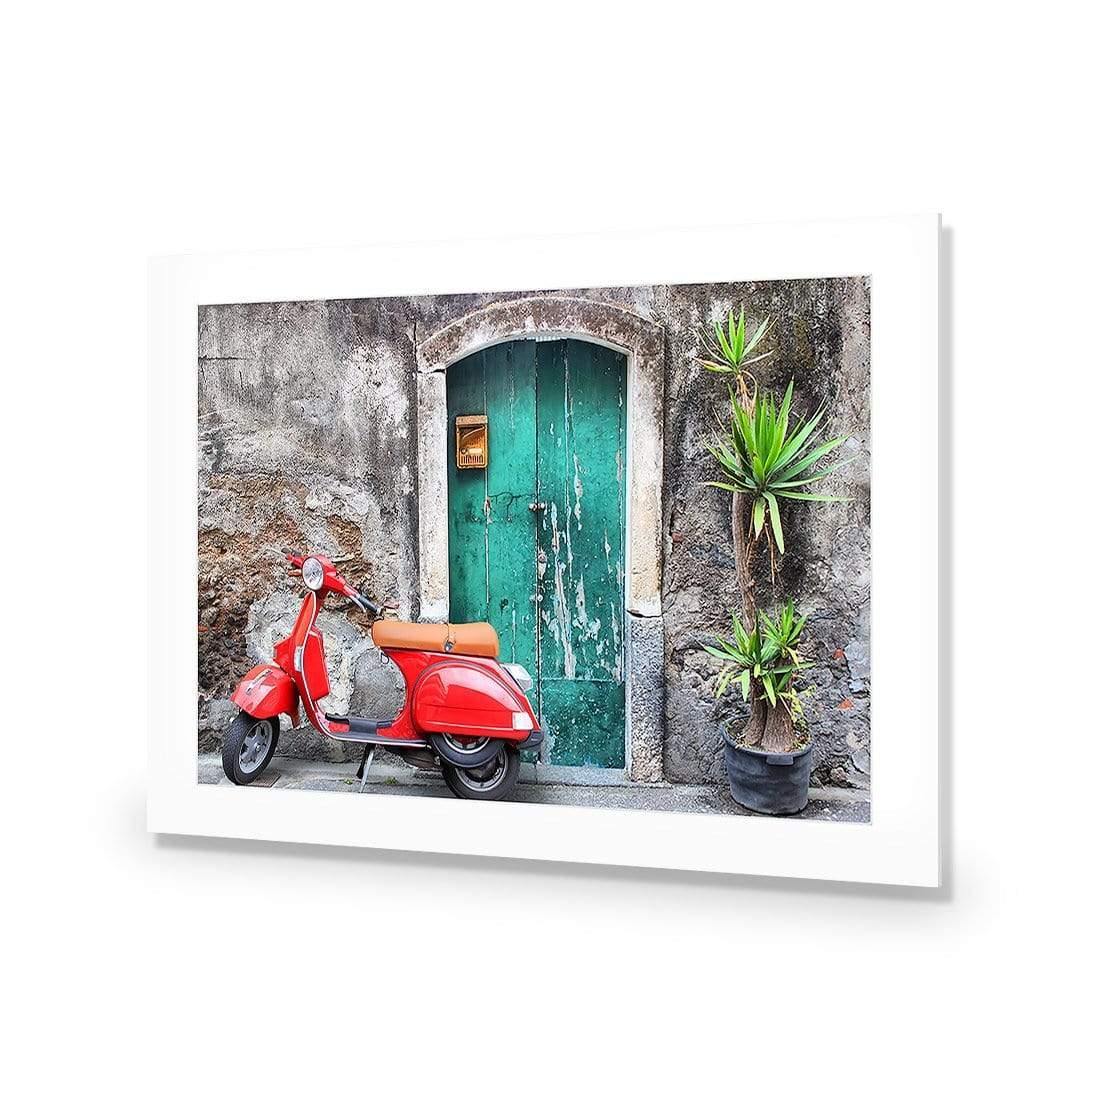 Vintage Door and Scooter - wallart-australia - Acrylic Glass With Border